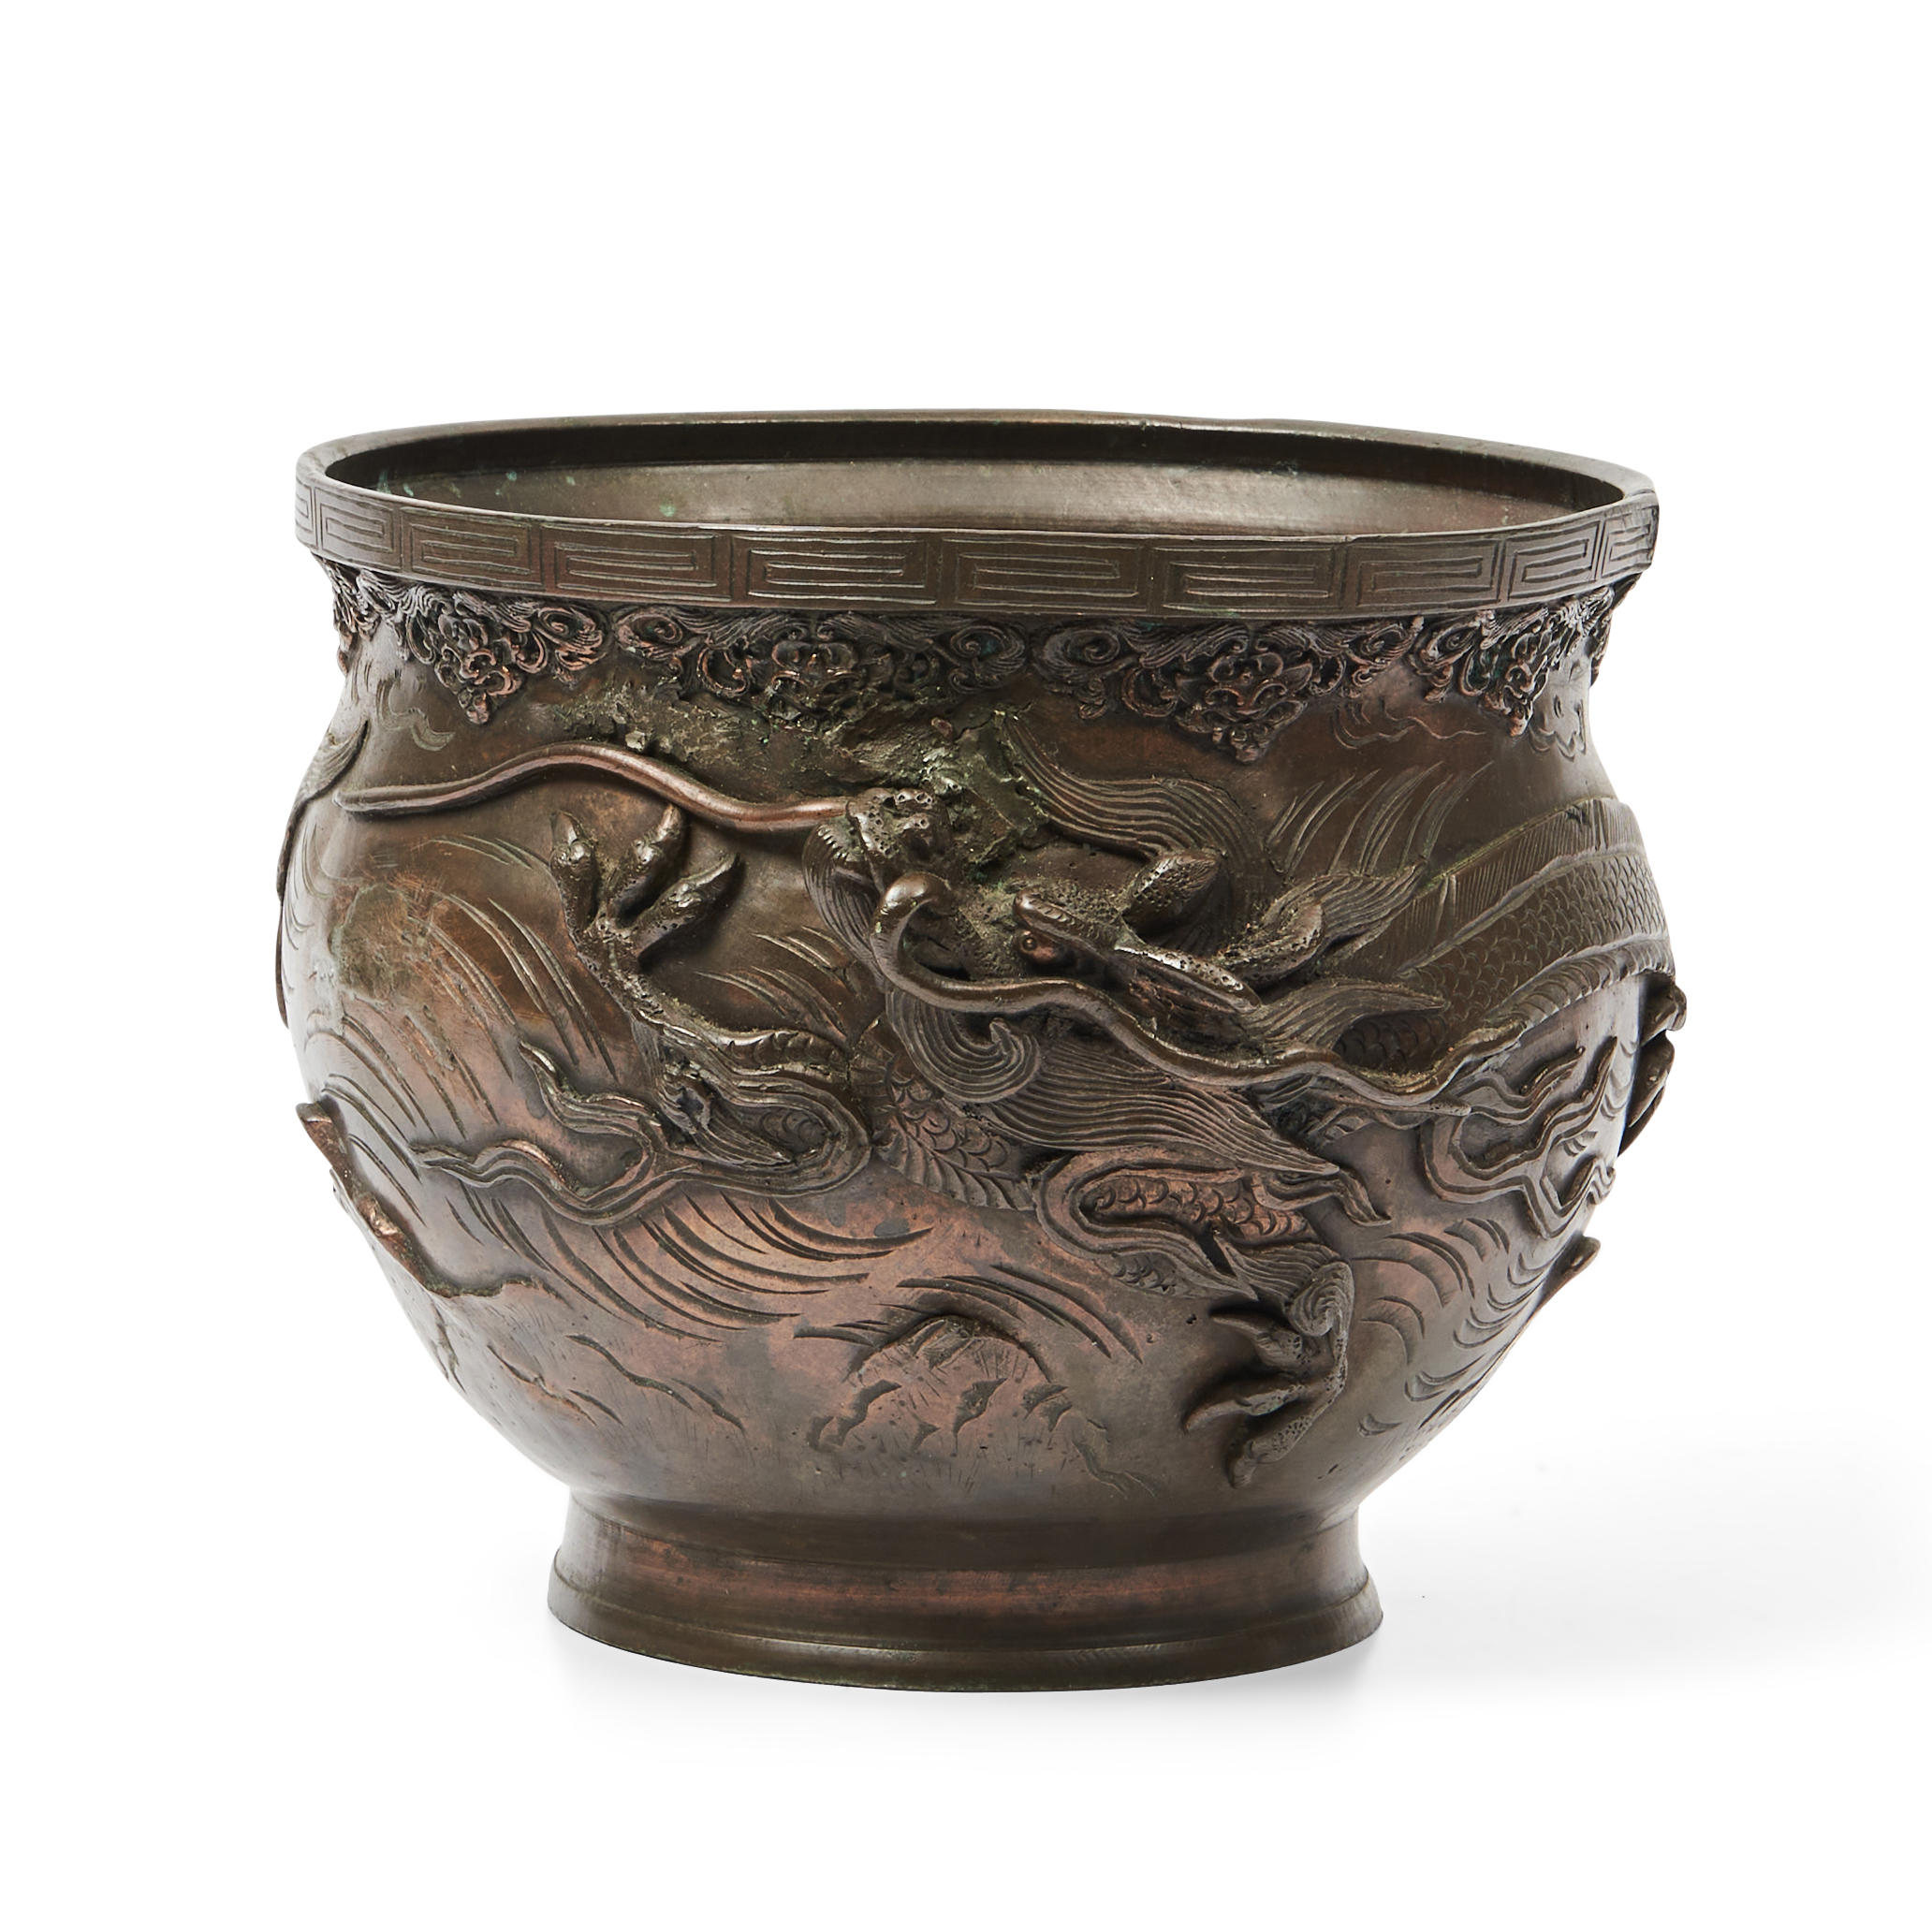 ASIAN-STYLE METAL JARDINIERE with